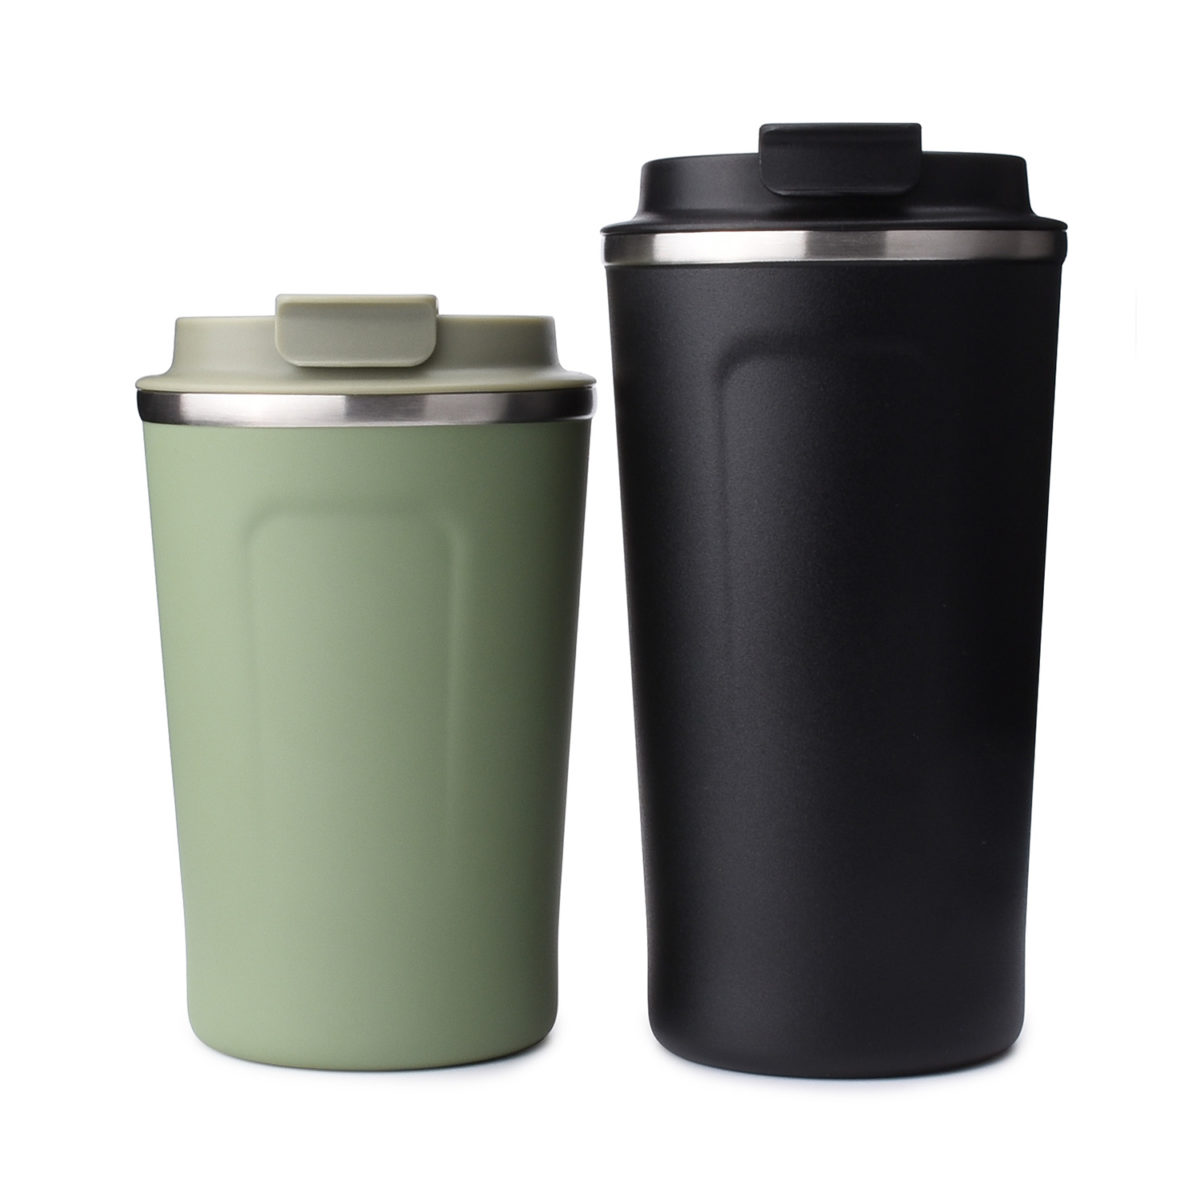 https://www.waterbottle.tech/wp-content/uploads/2021/04/tumbler-12oz-insulated-travel-coffee-mug-with-flid-lid-s2212f5-5-1200x1200.jpg